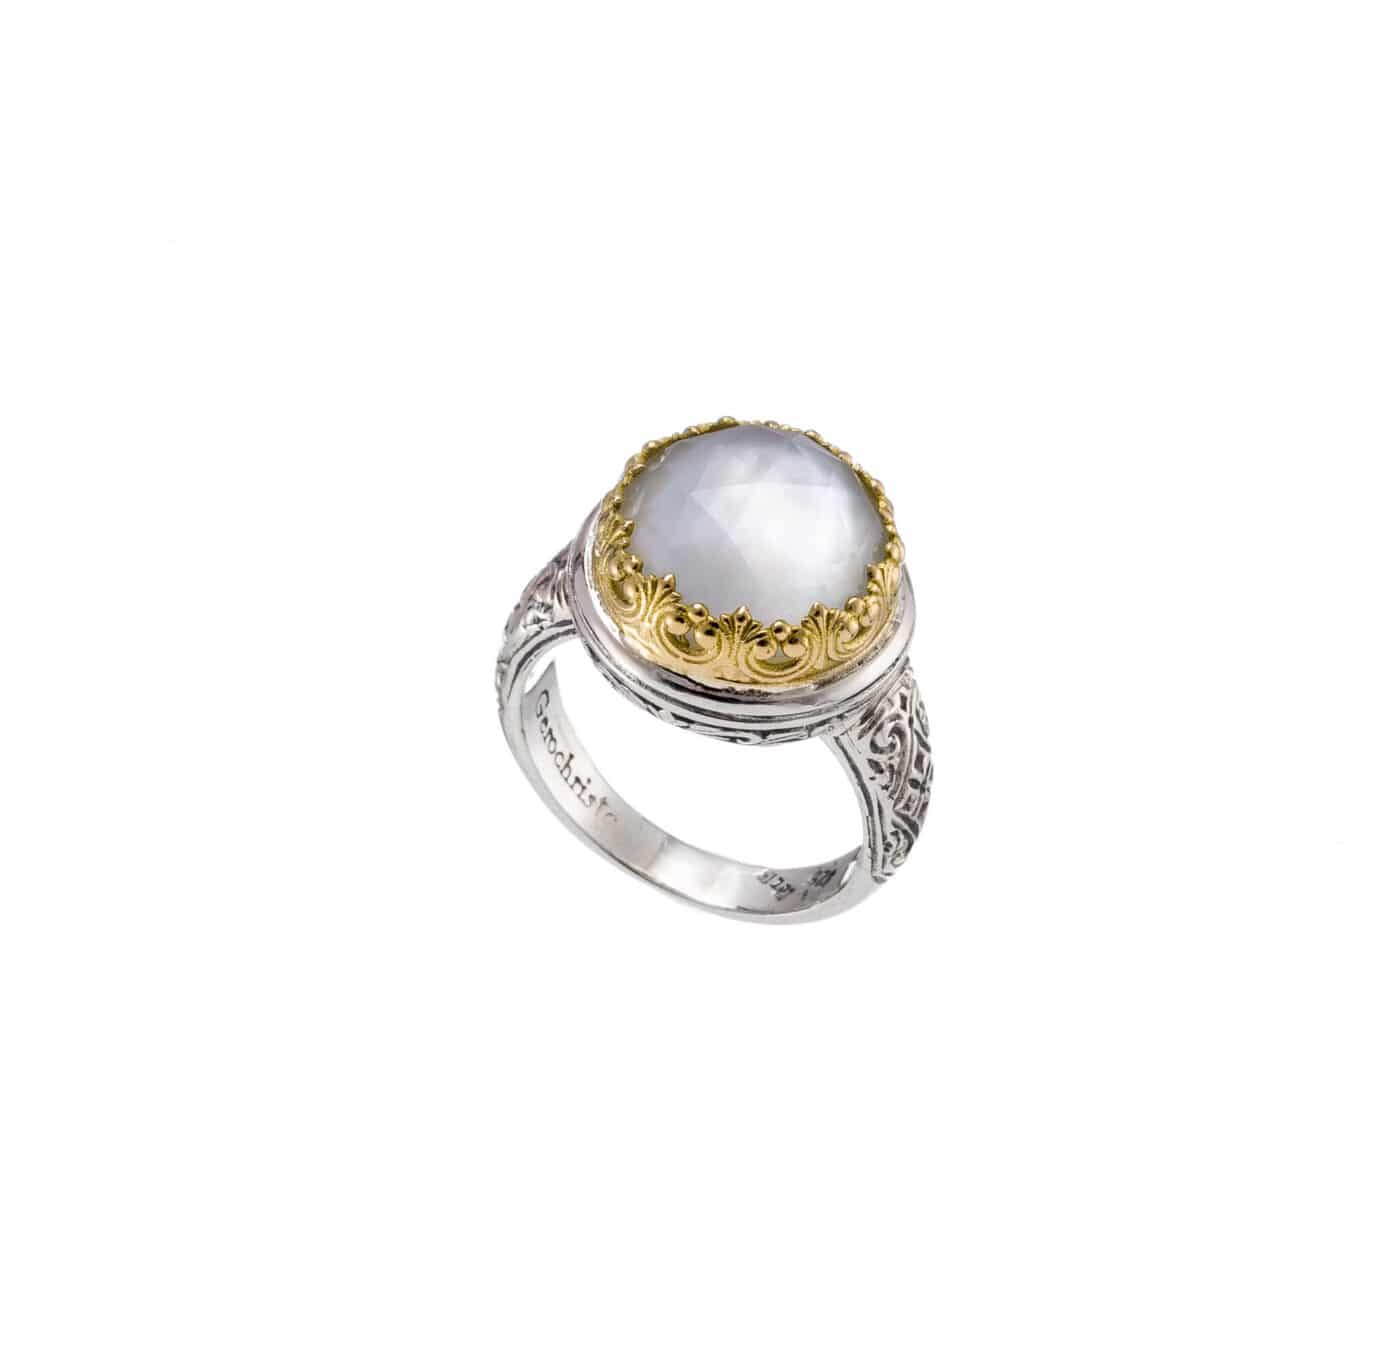 Iris ring in 18K Gold and Sterling Silver with gemstone - Gerochristo ...